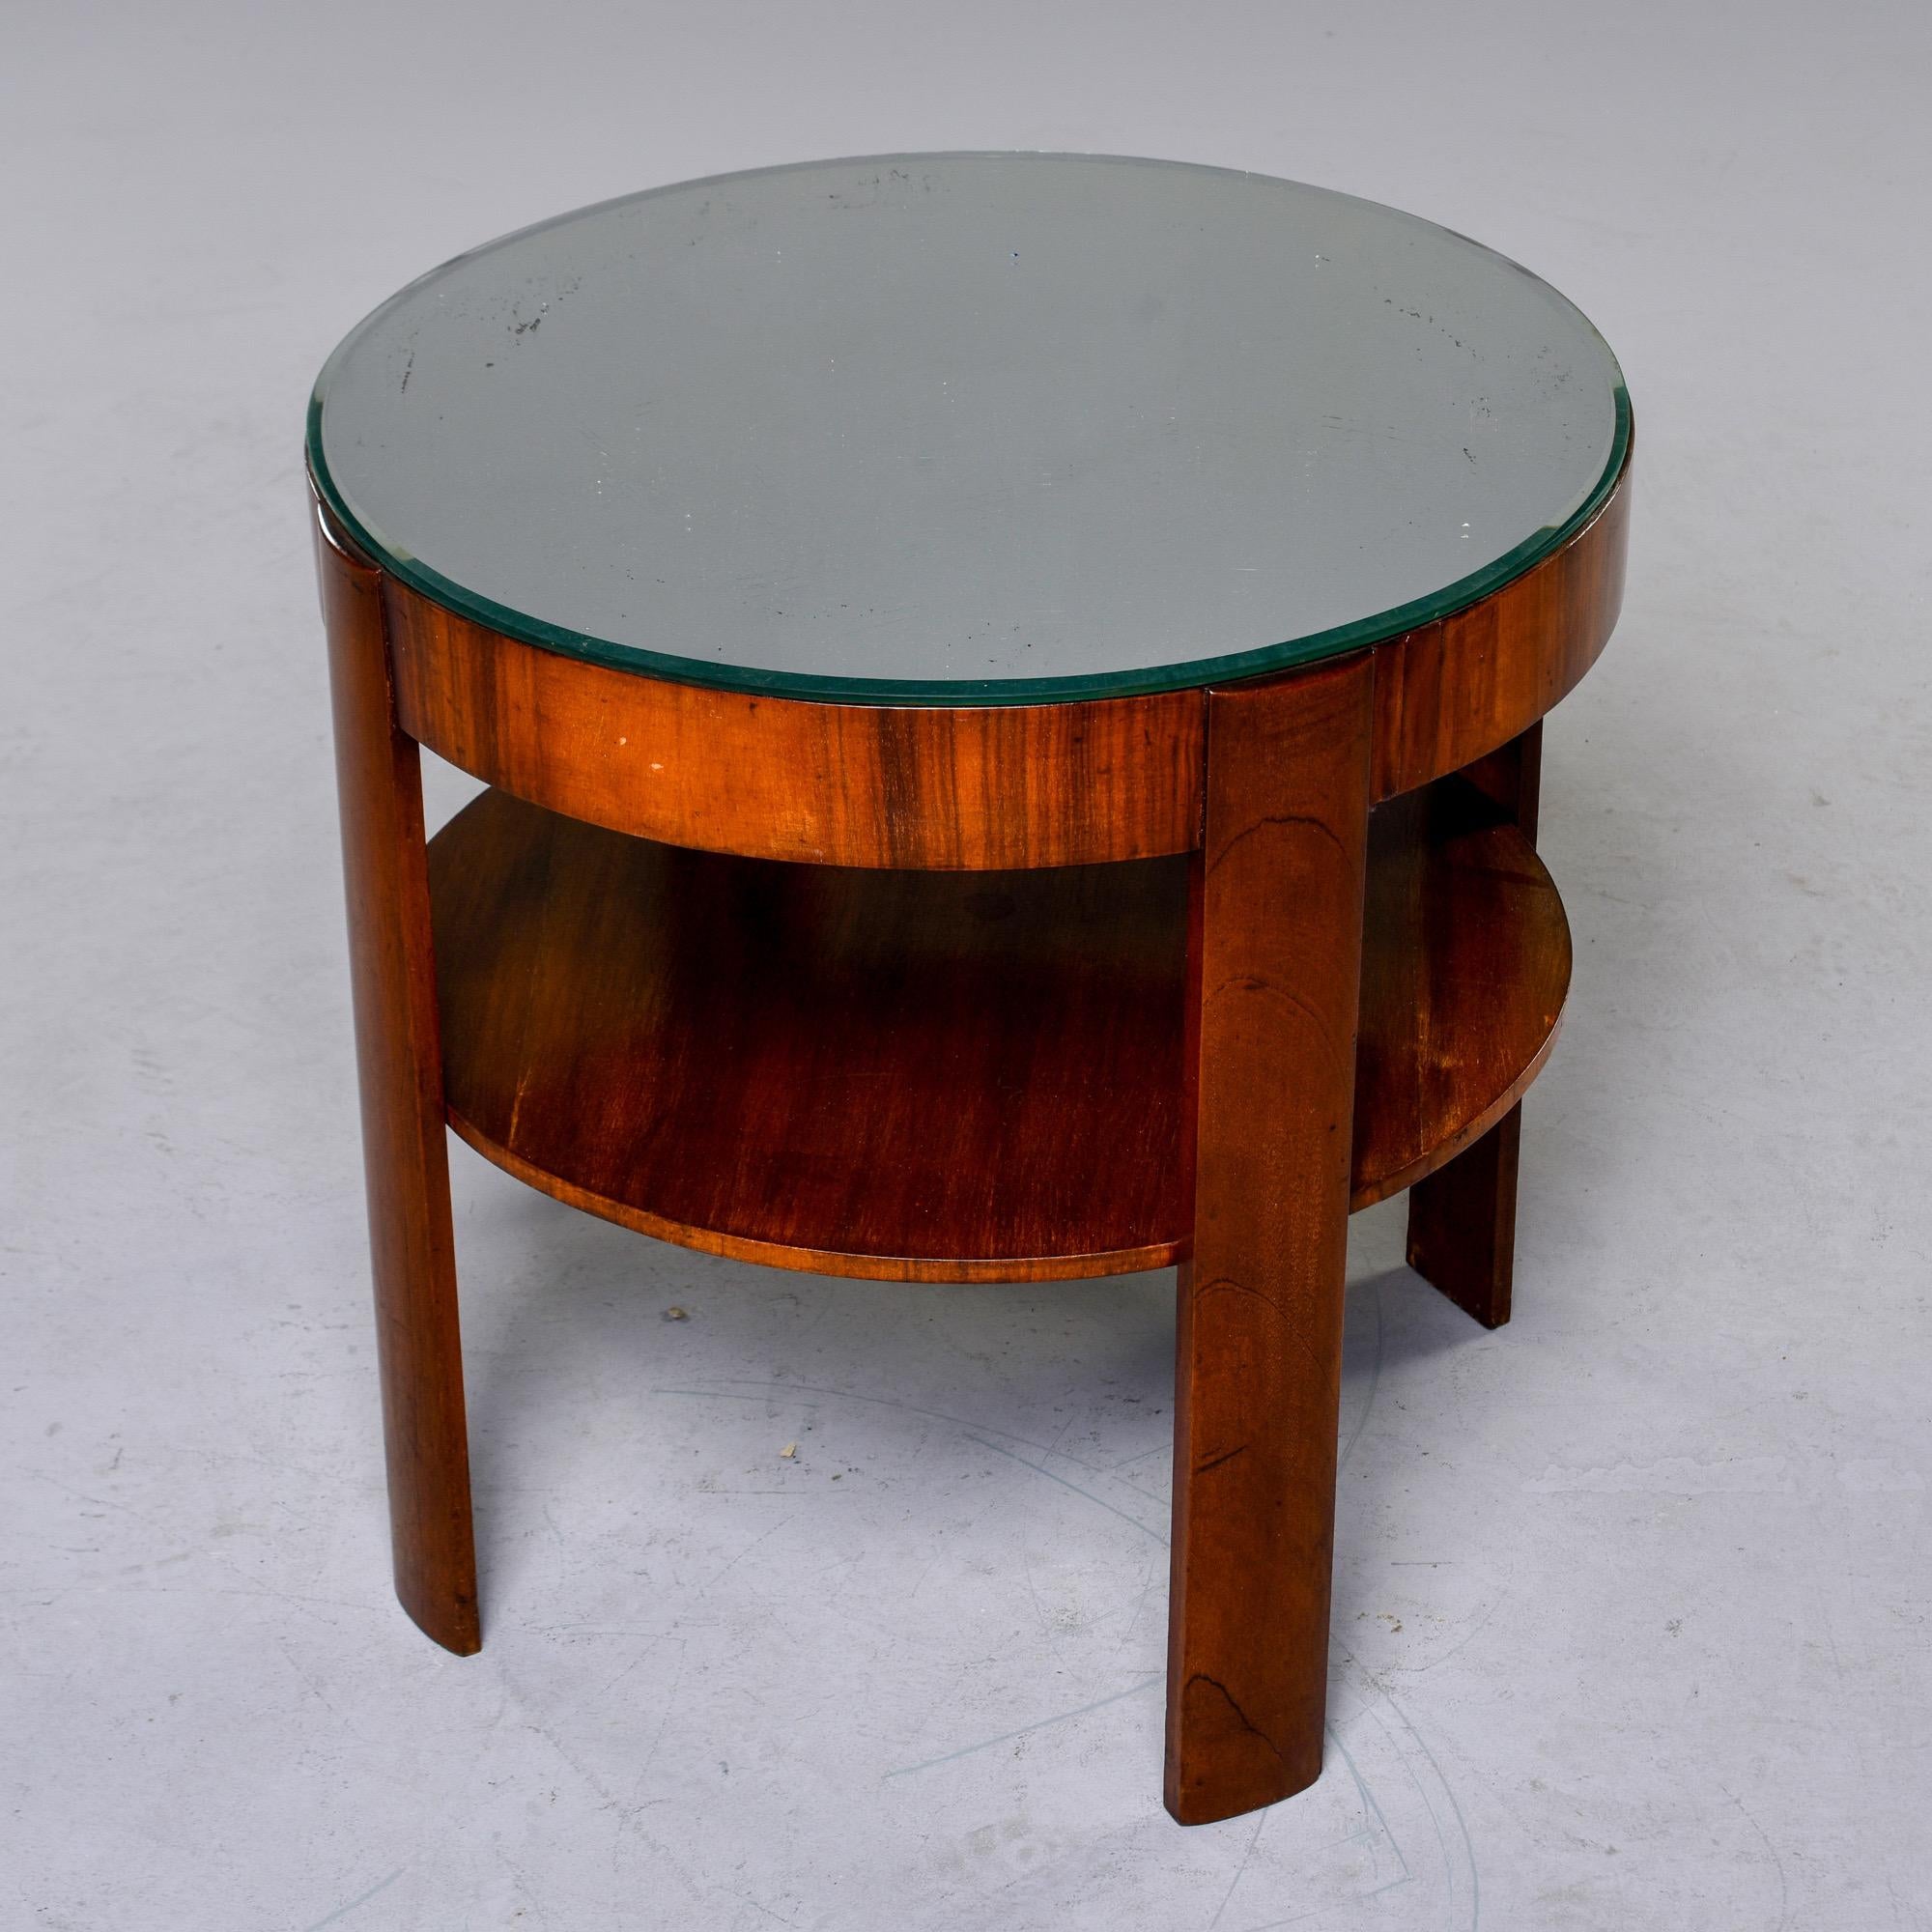 French two-tier round side table in flame mahogany with flat legs and mirrored top, circa late 1930s-early 1940s. Unknown maker.